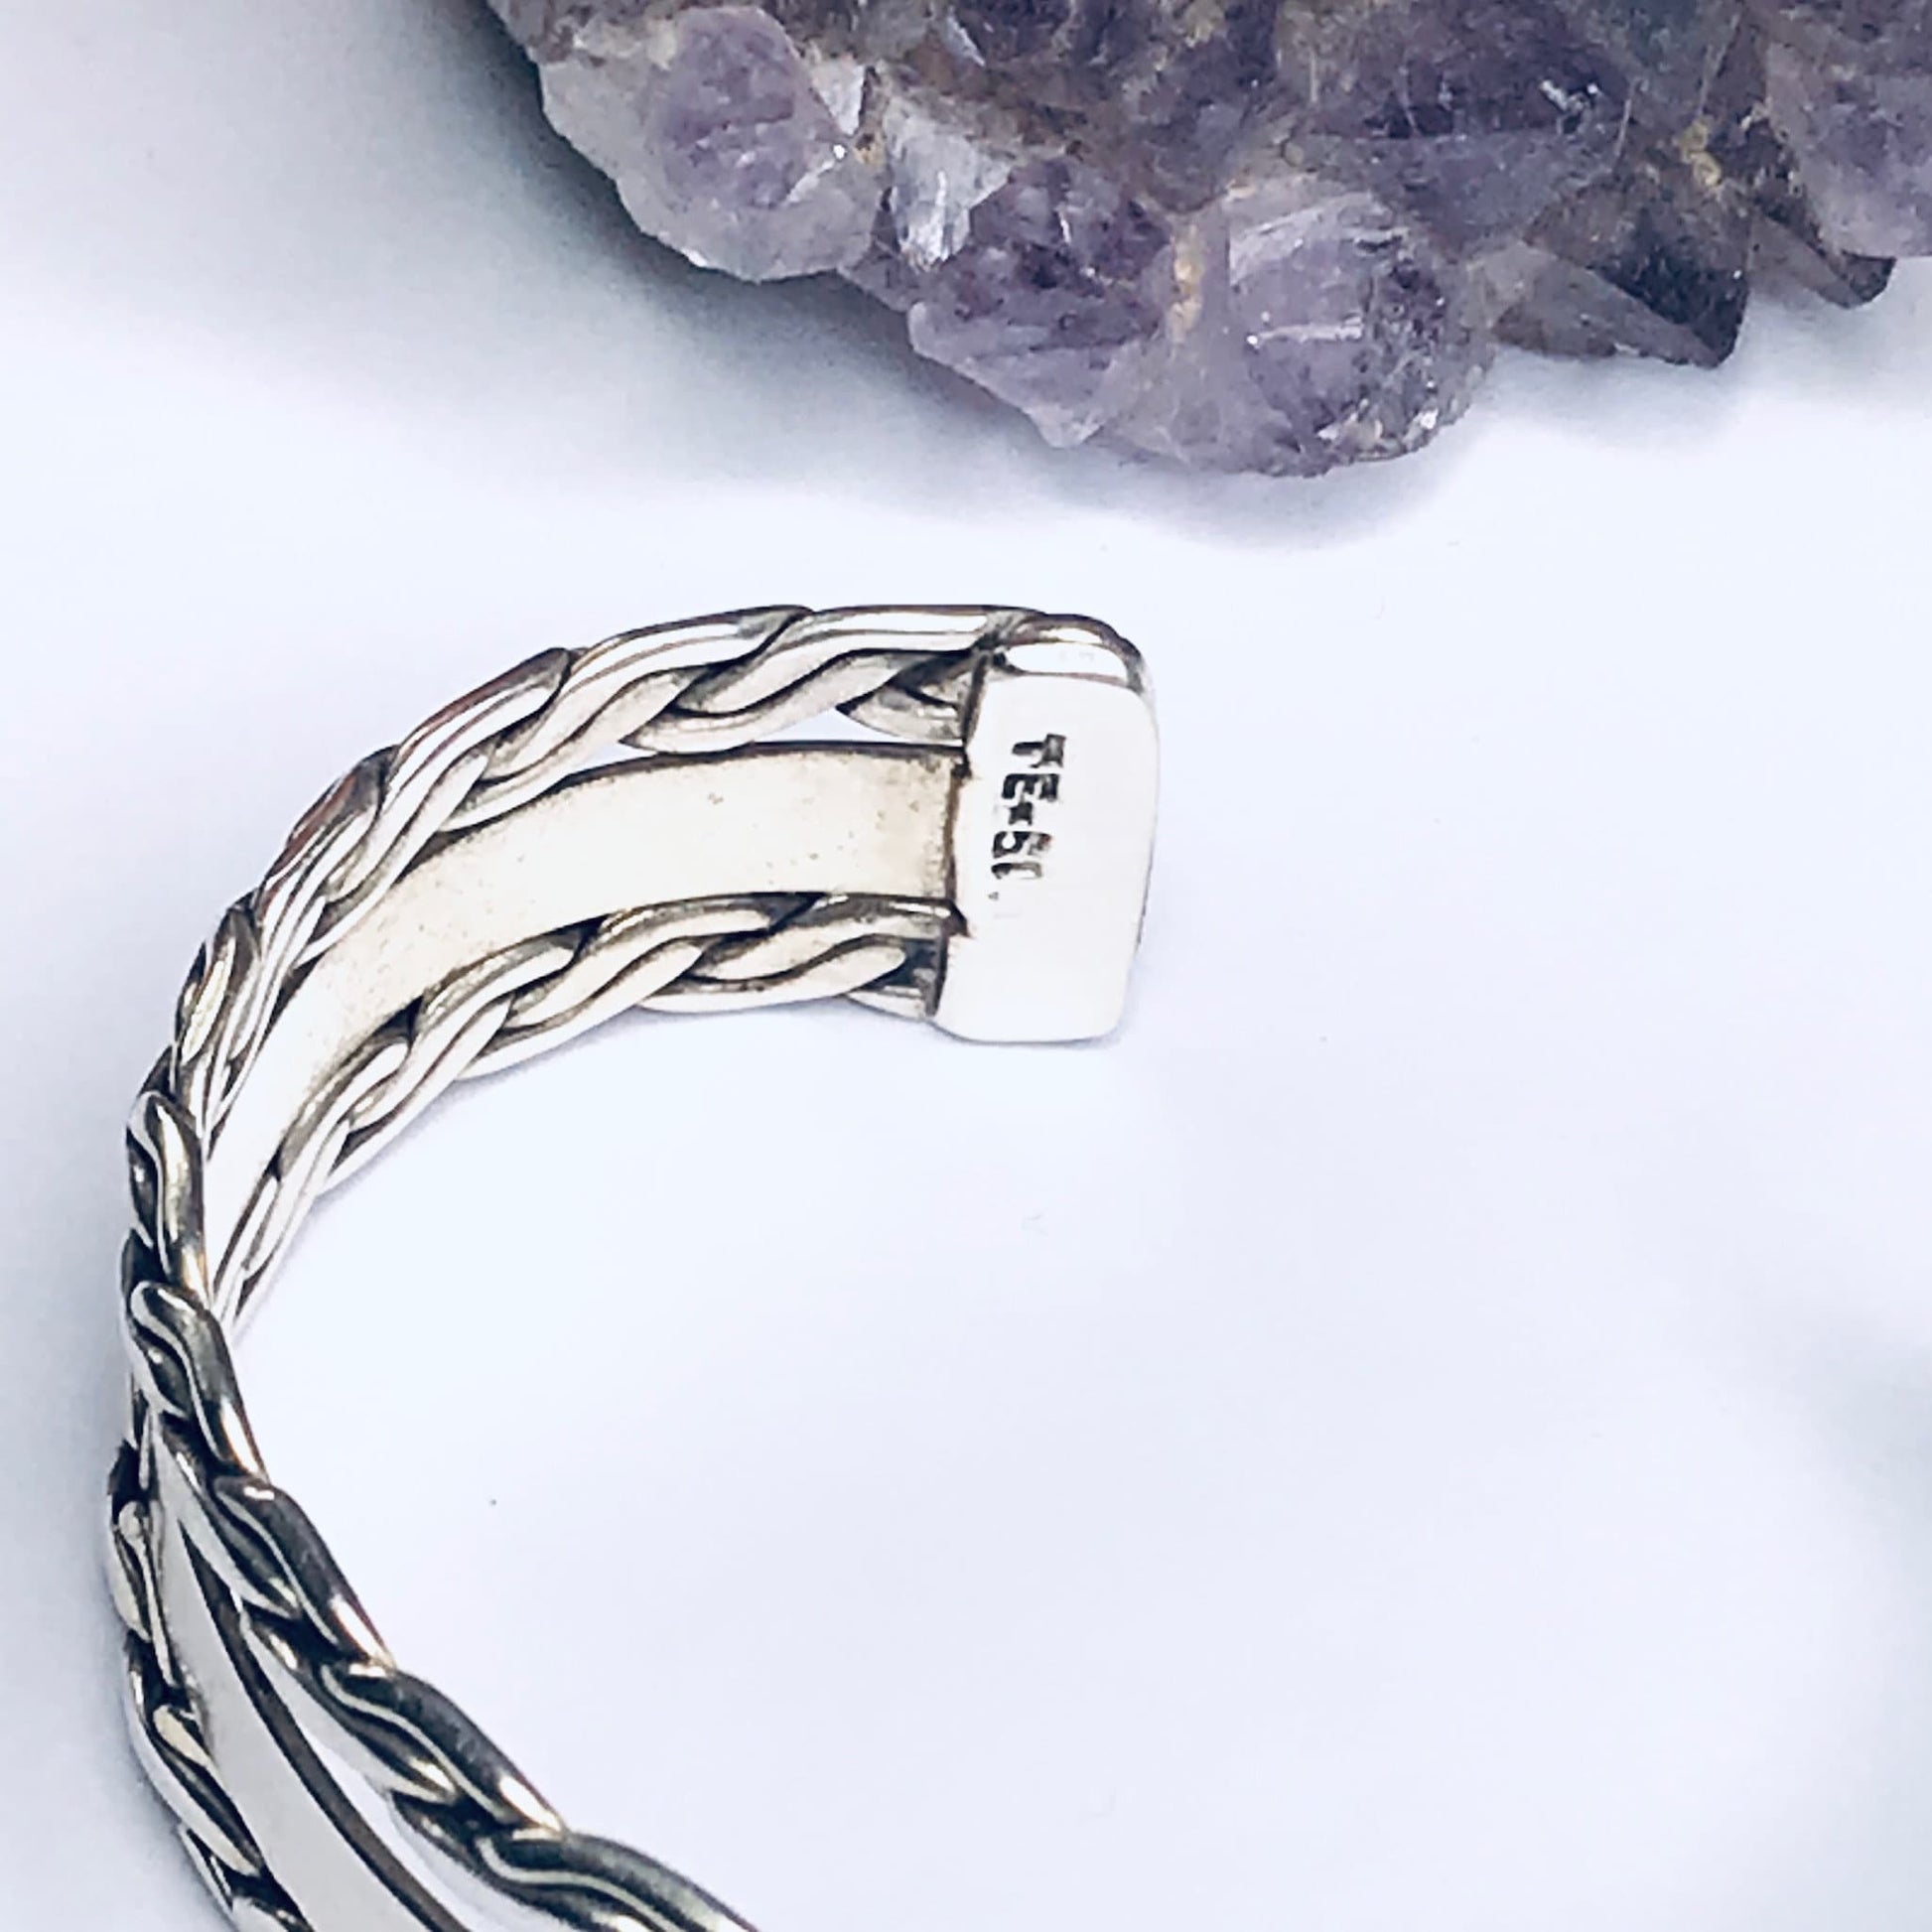 Vintage Sterling Silver Weave Cuff Bracelet with TE-51 Stamp from Mexico, Minimalist 925 Silver Cuff with Braided Woven Design